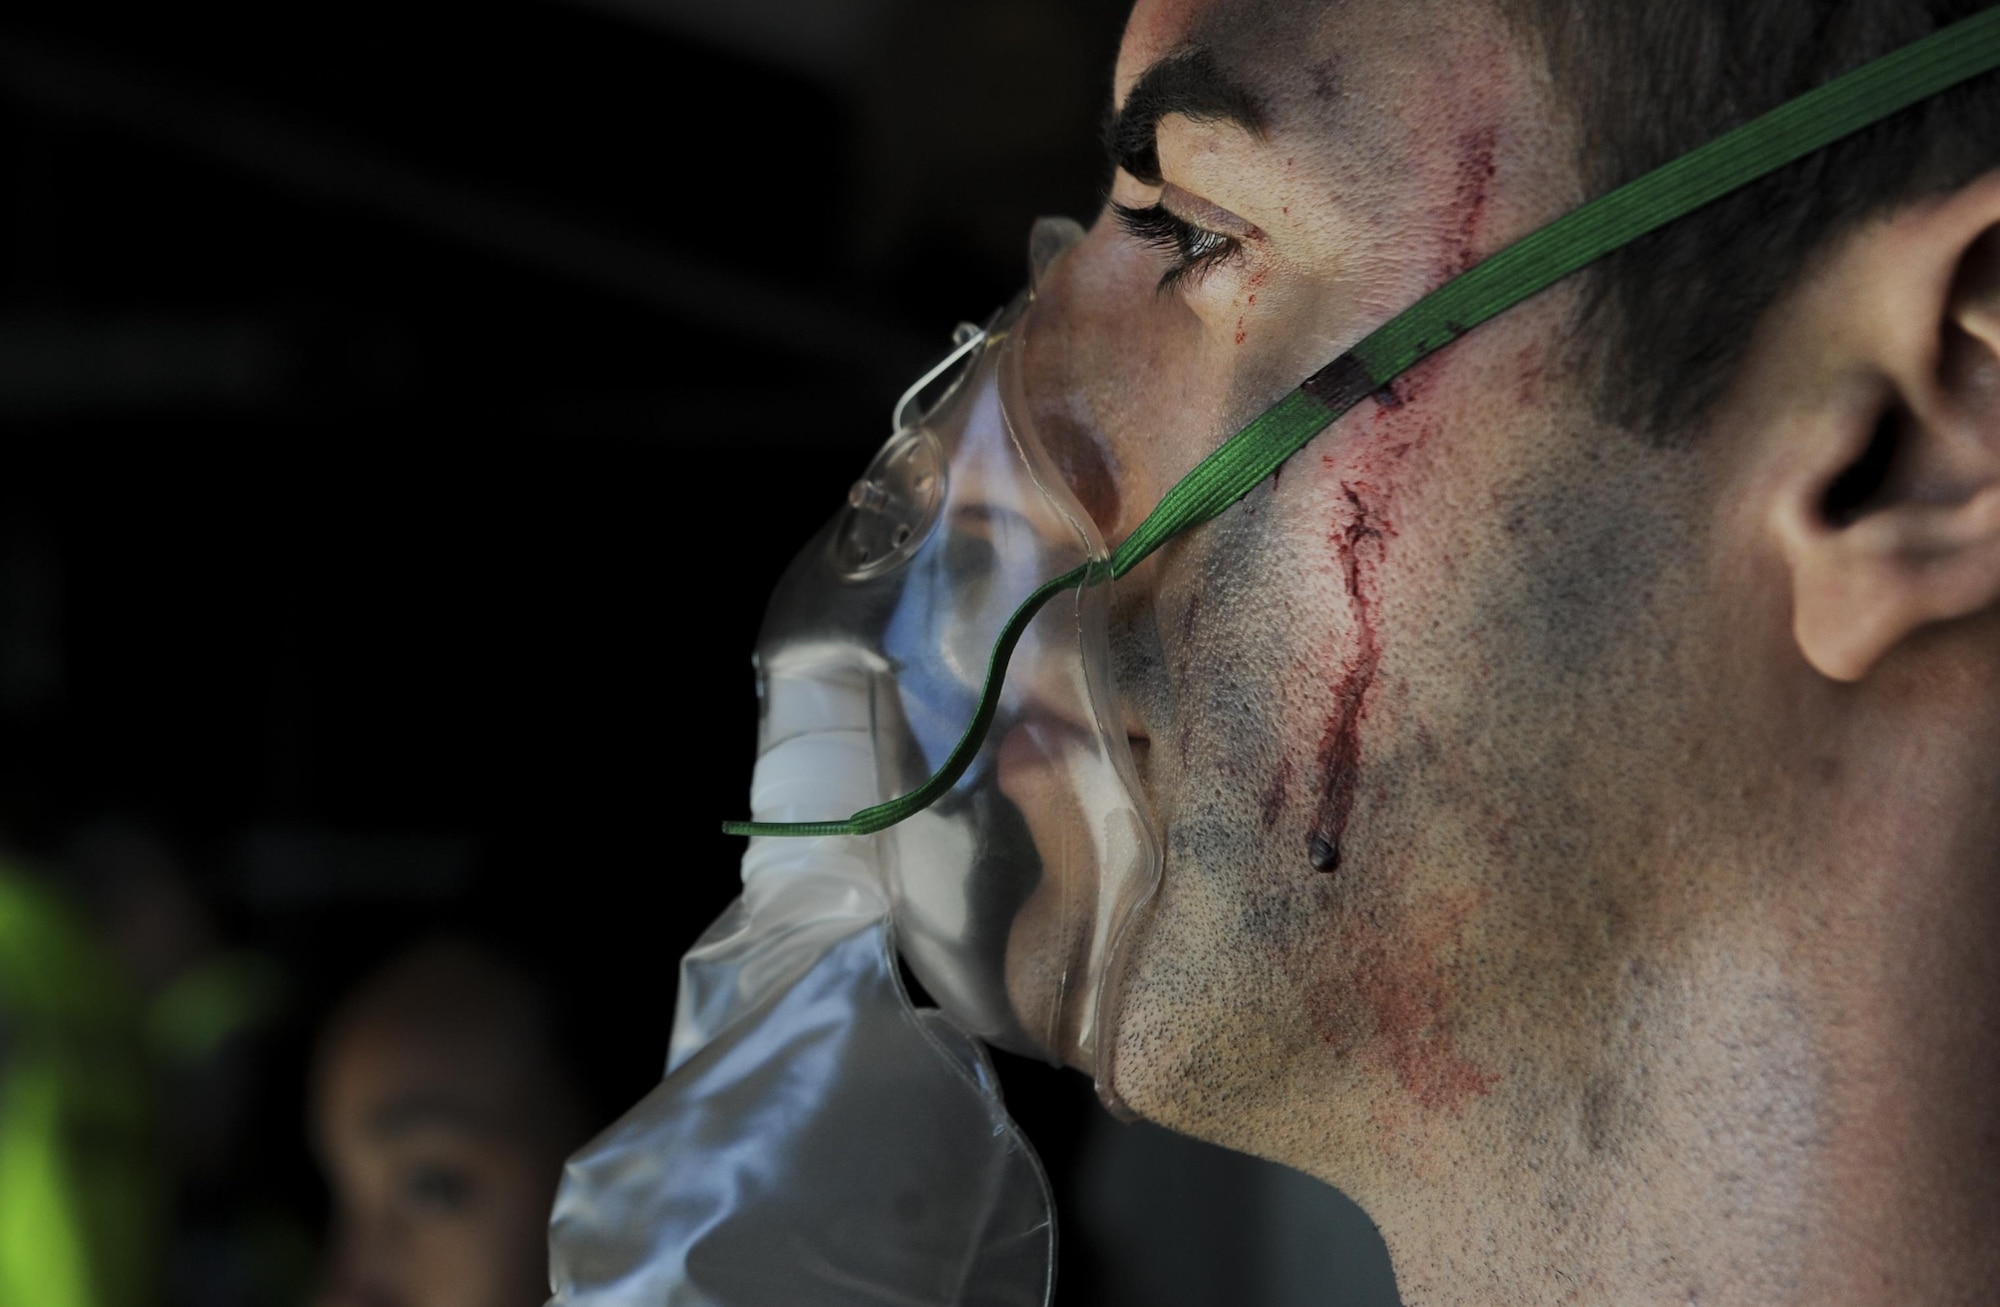 A simulated casualty breaths into a mask in a medical hangar during the Major Accident Recovery Exercise at Nellis Air Force Base, Nev., Oct. 13, 2016. The participants included Wing Inspection Team (WIT) members, Scene Controllers for additional safety, and volunteers simulating victims and witnesses to the incident. (U.S. Air Force photo by Airman 1st Class Kevin Tanenbaum/Released)